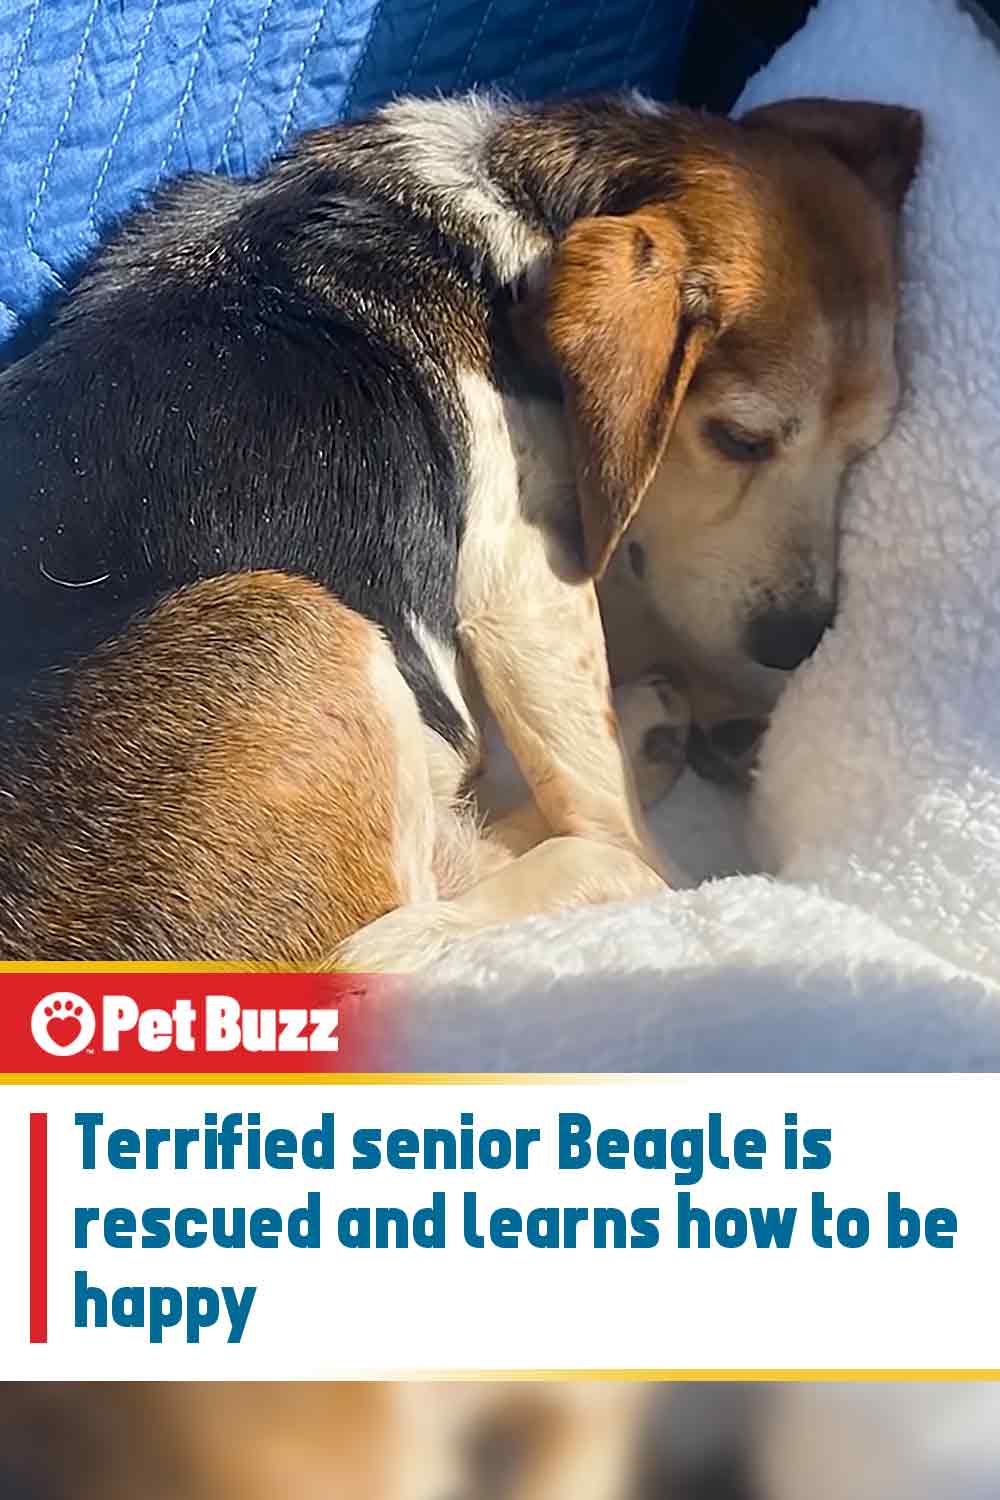 Terrified senior Beagle is rescued and learns how to be happy